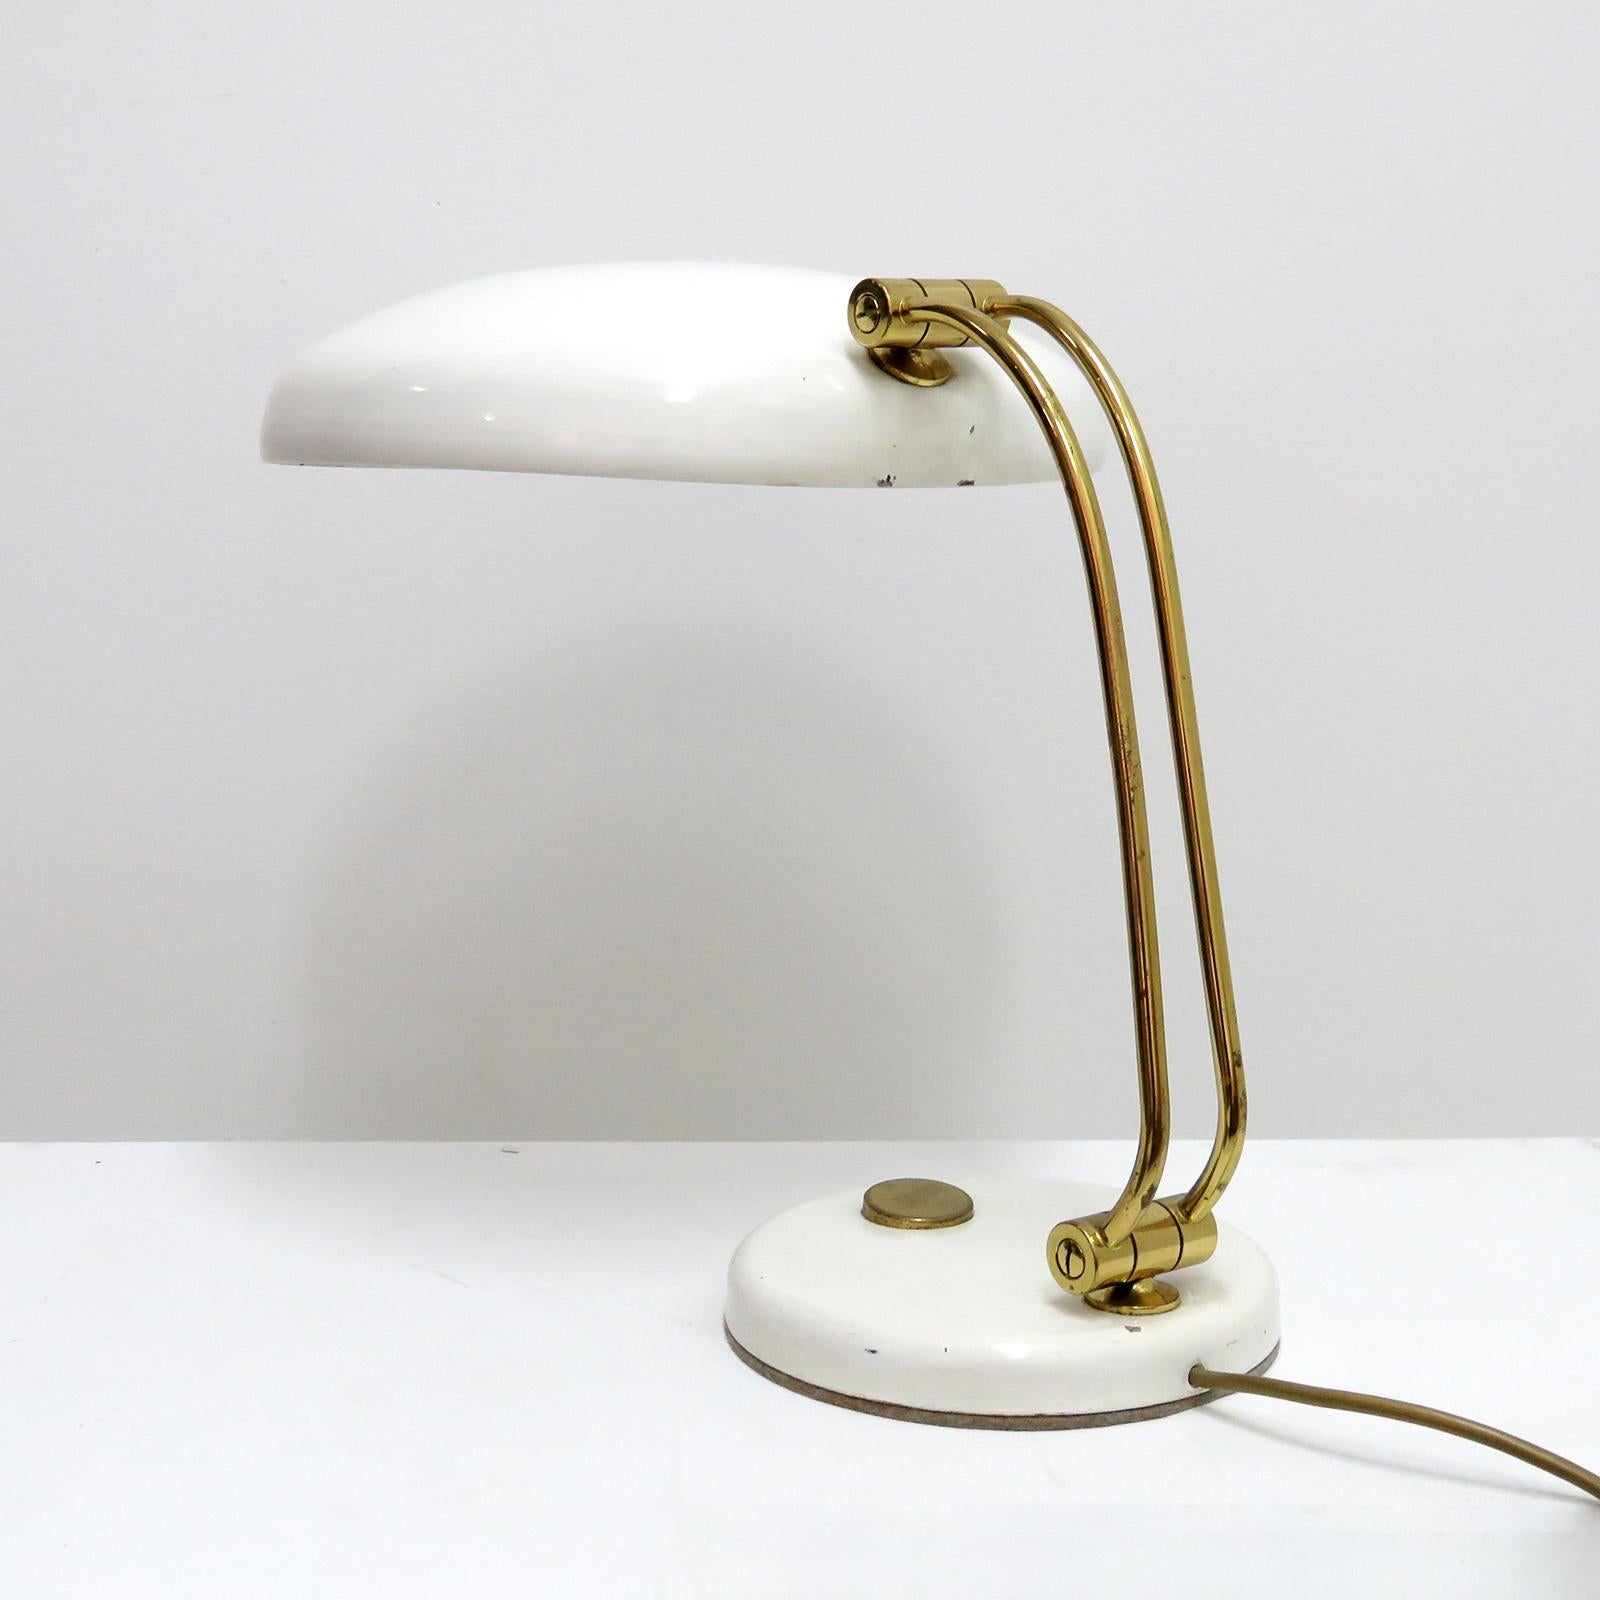 Hillebrand Desk Lamp, 1960 In Good Condition For Sale In Los Angeles, CA